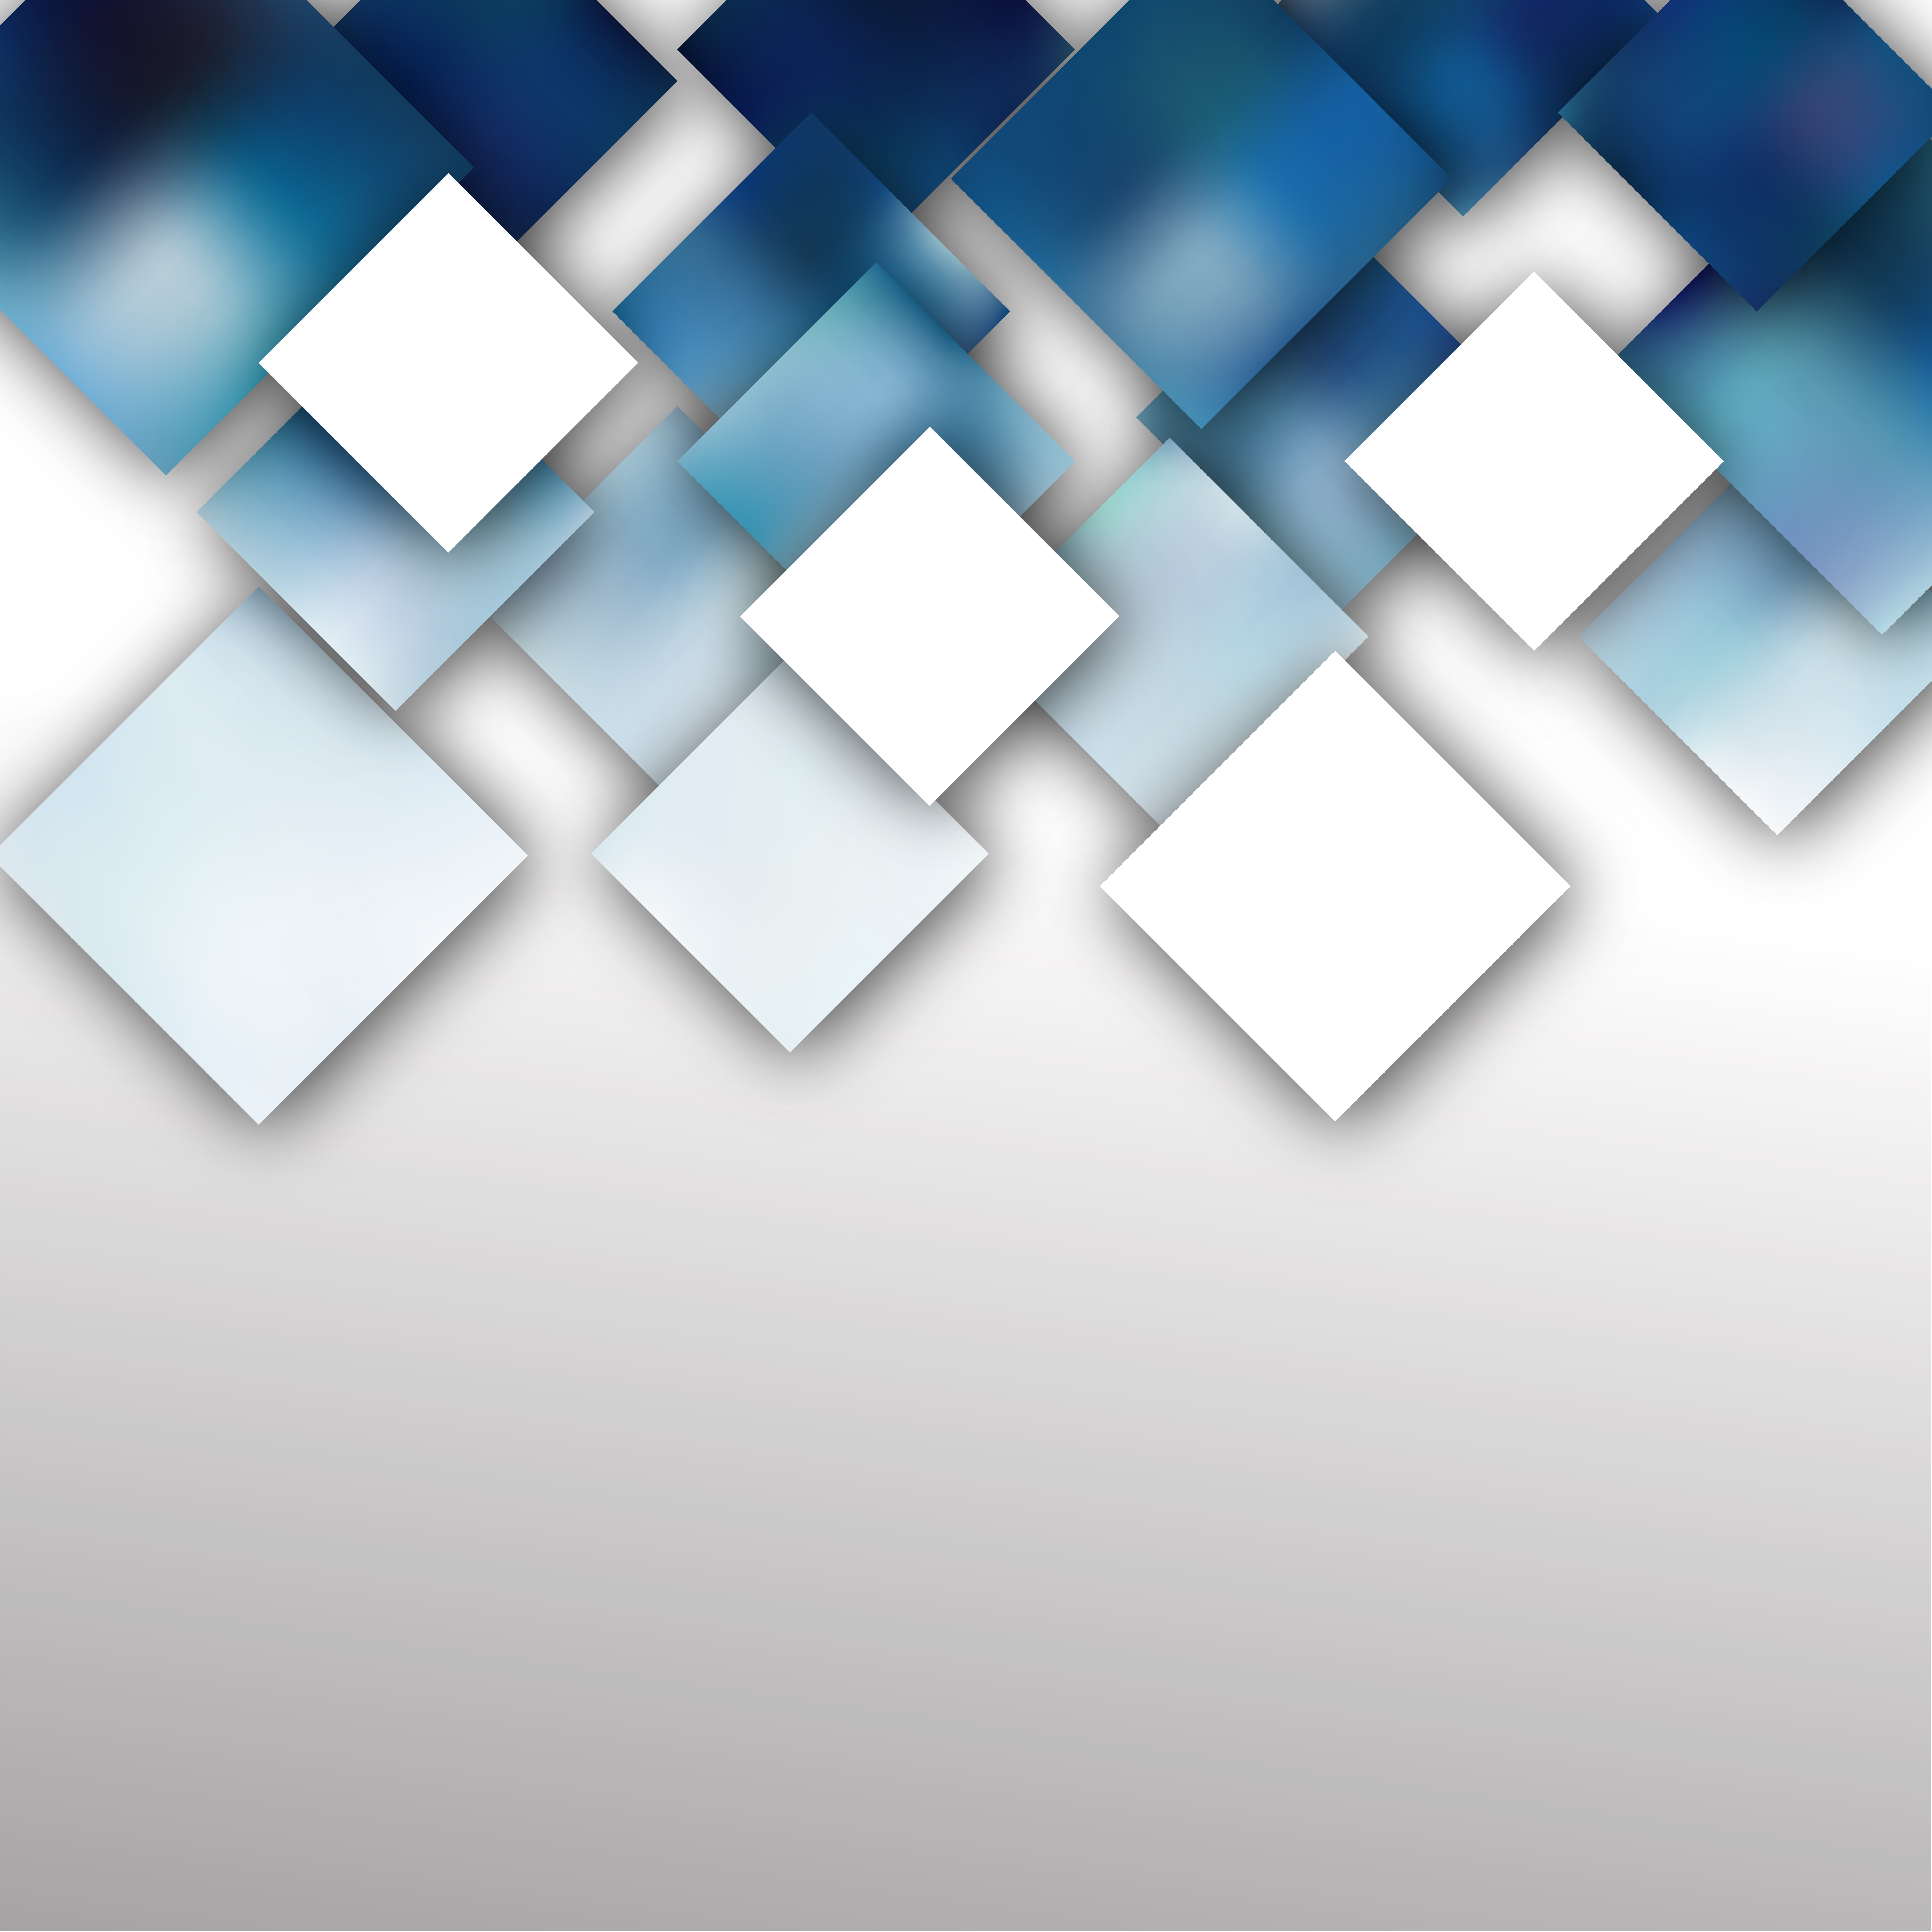 Free Modern Blue And White Square Background Image